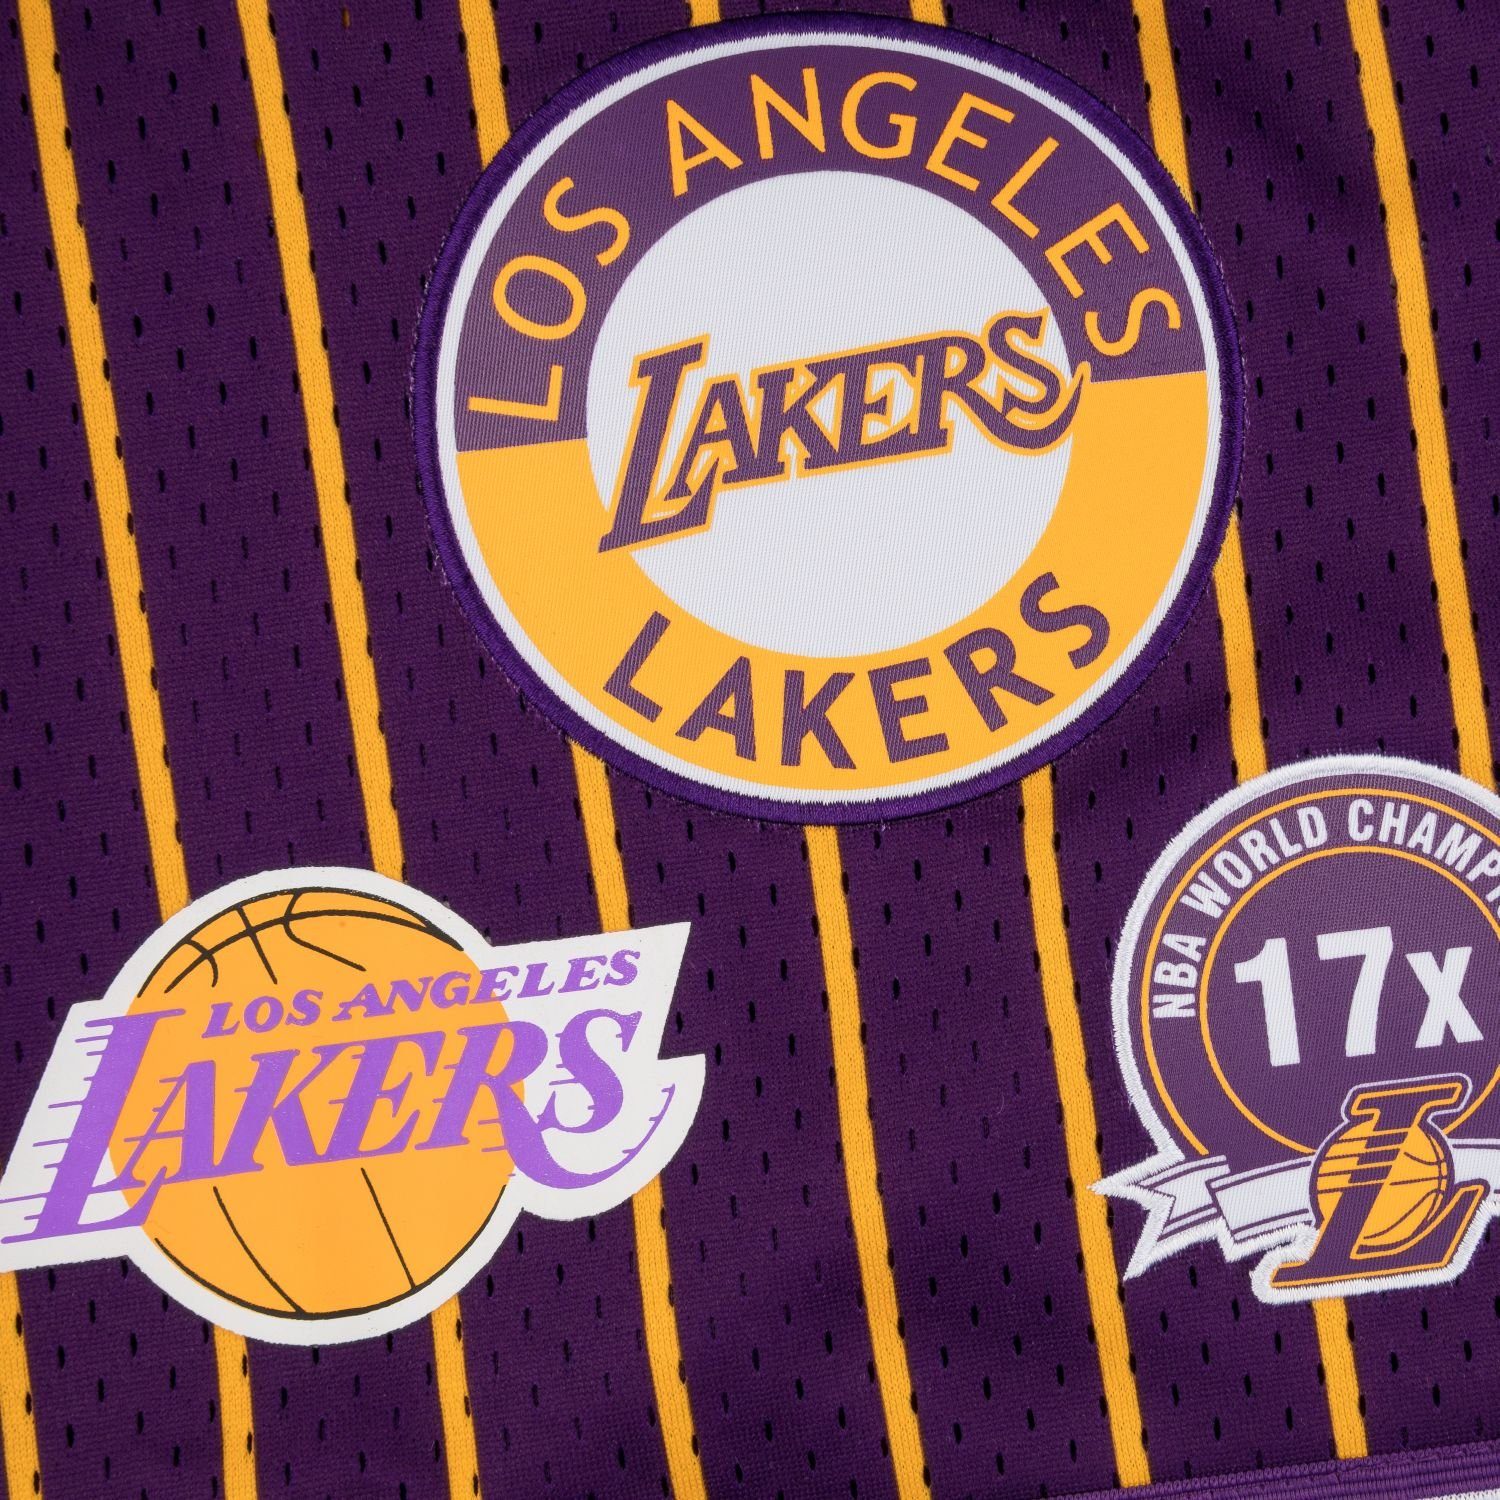 City Ness & Shorts Lakers Los Collection Mitchell Angeles